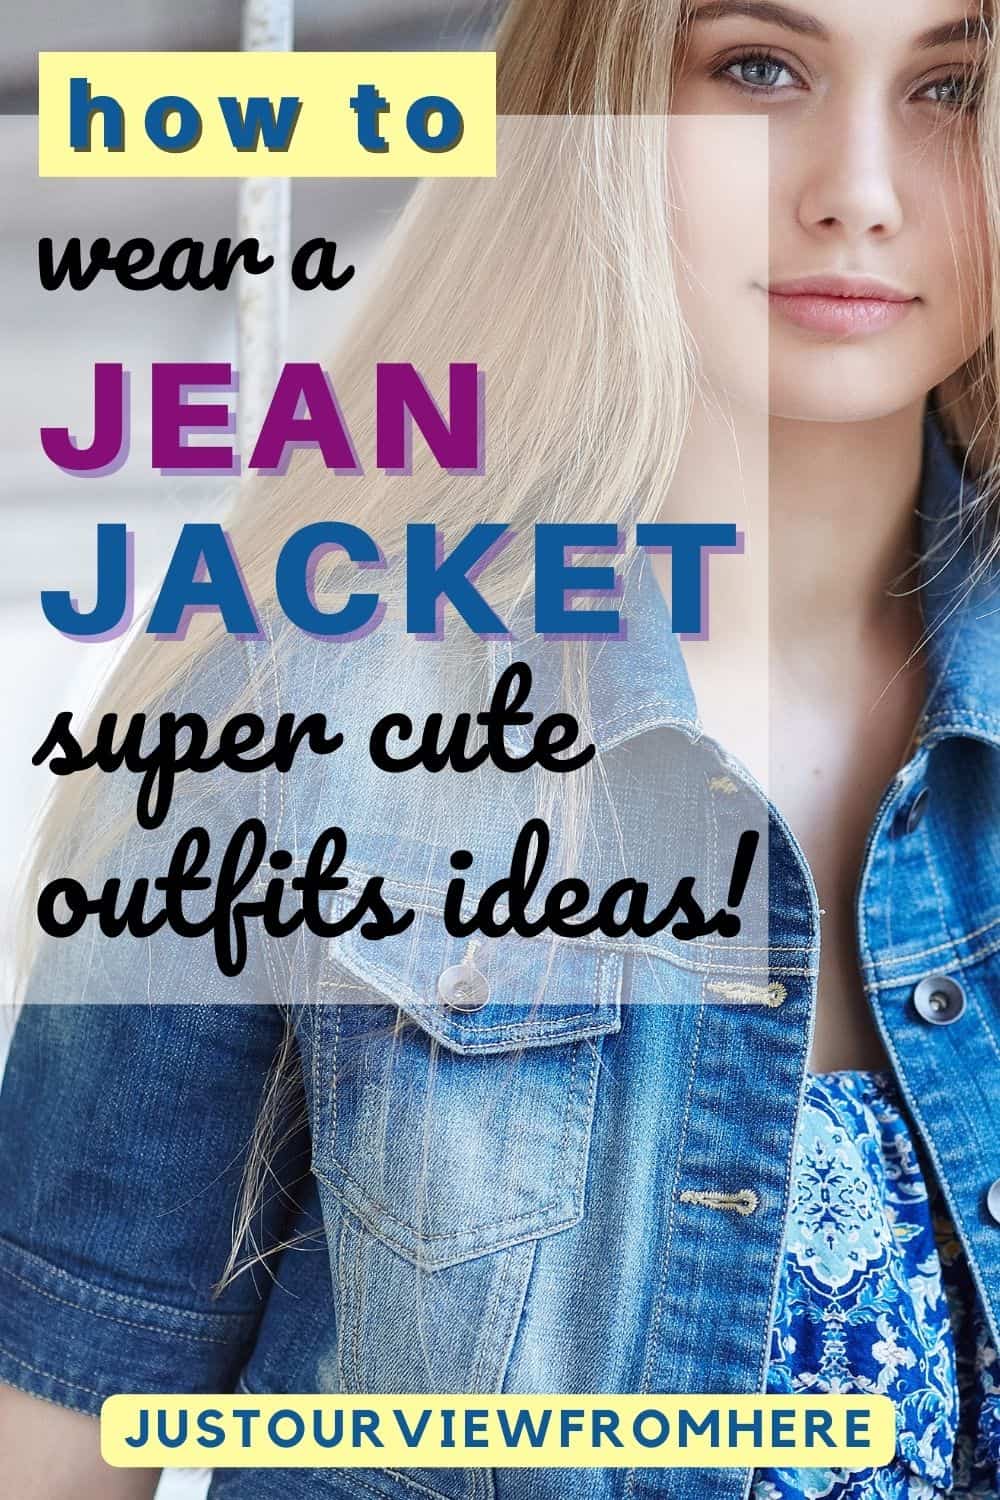 Denim jacket outfit ideas 2019 for ladies to wear in winter - Styledme | Stylish  denim, Denim jacket outfit, Outfits